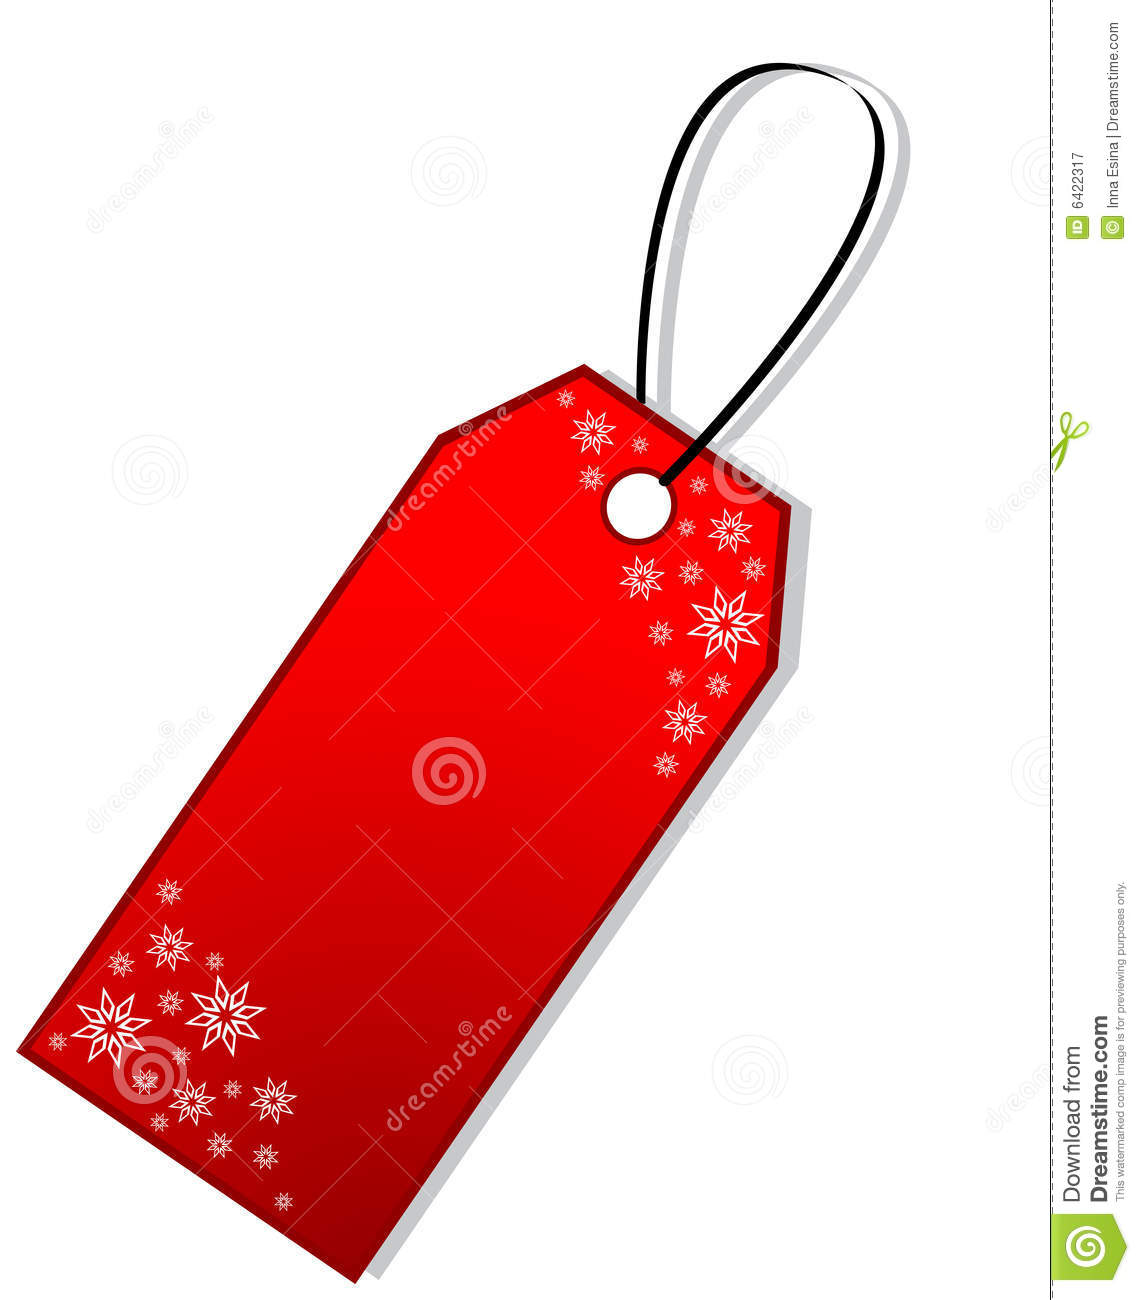 free clipart christmas gift tags - photo #31